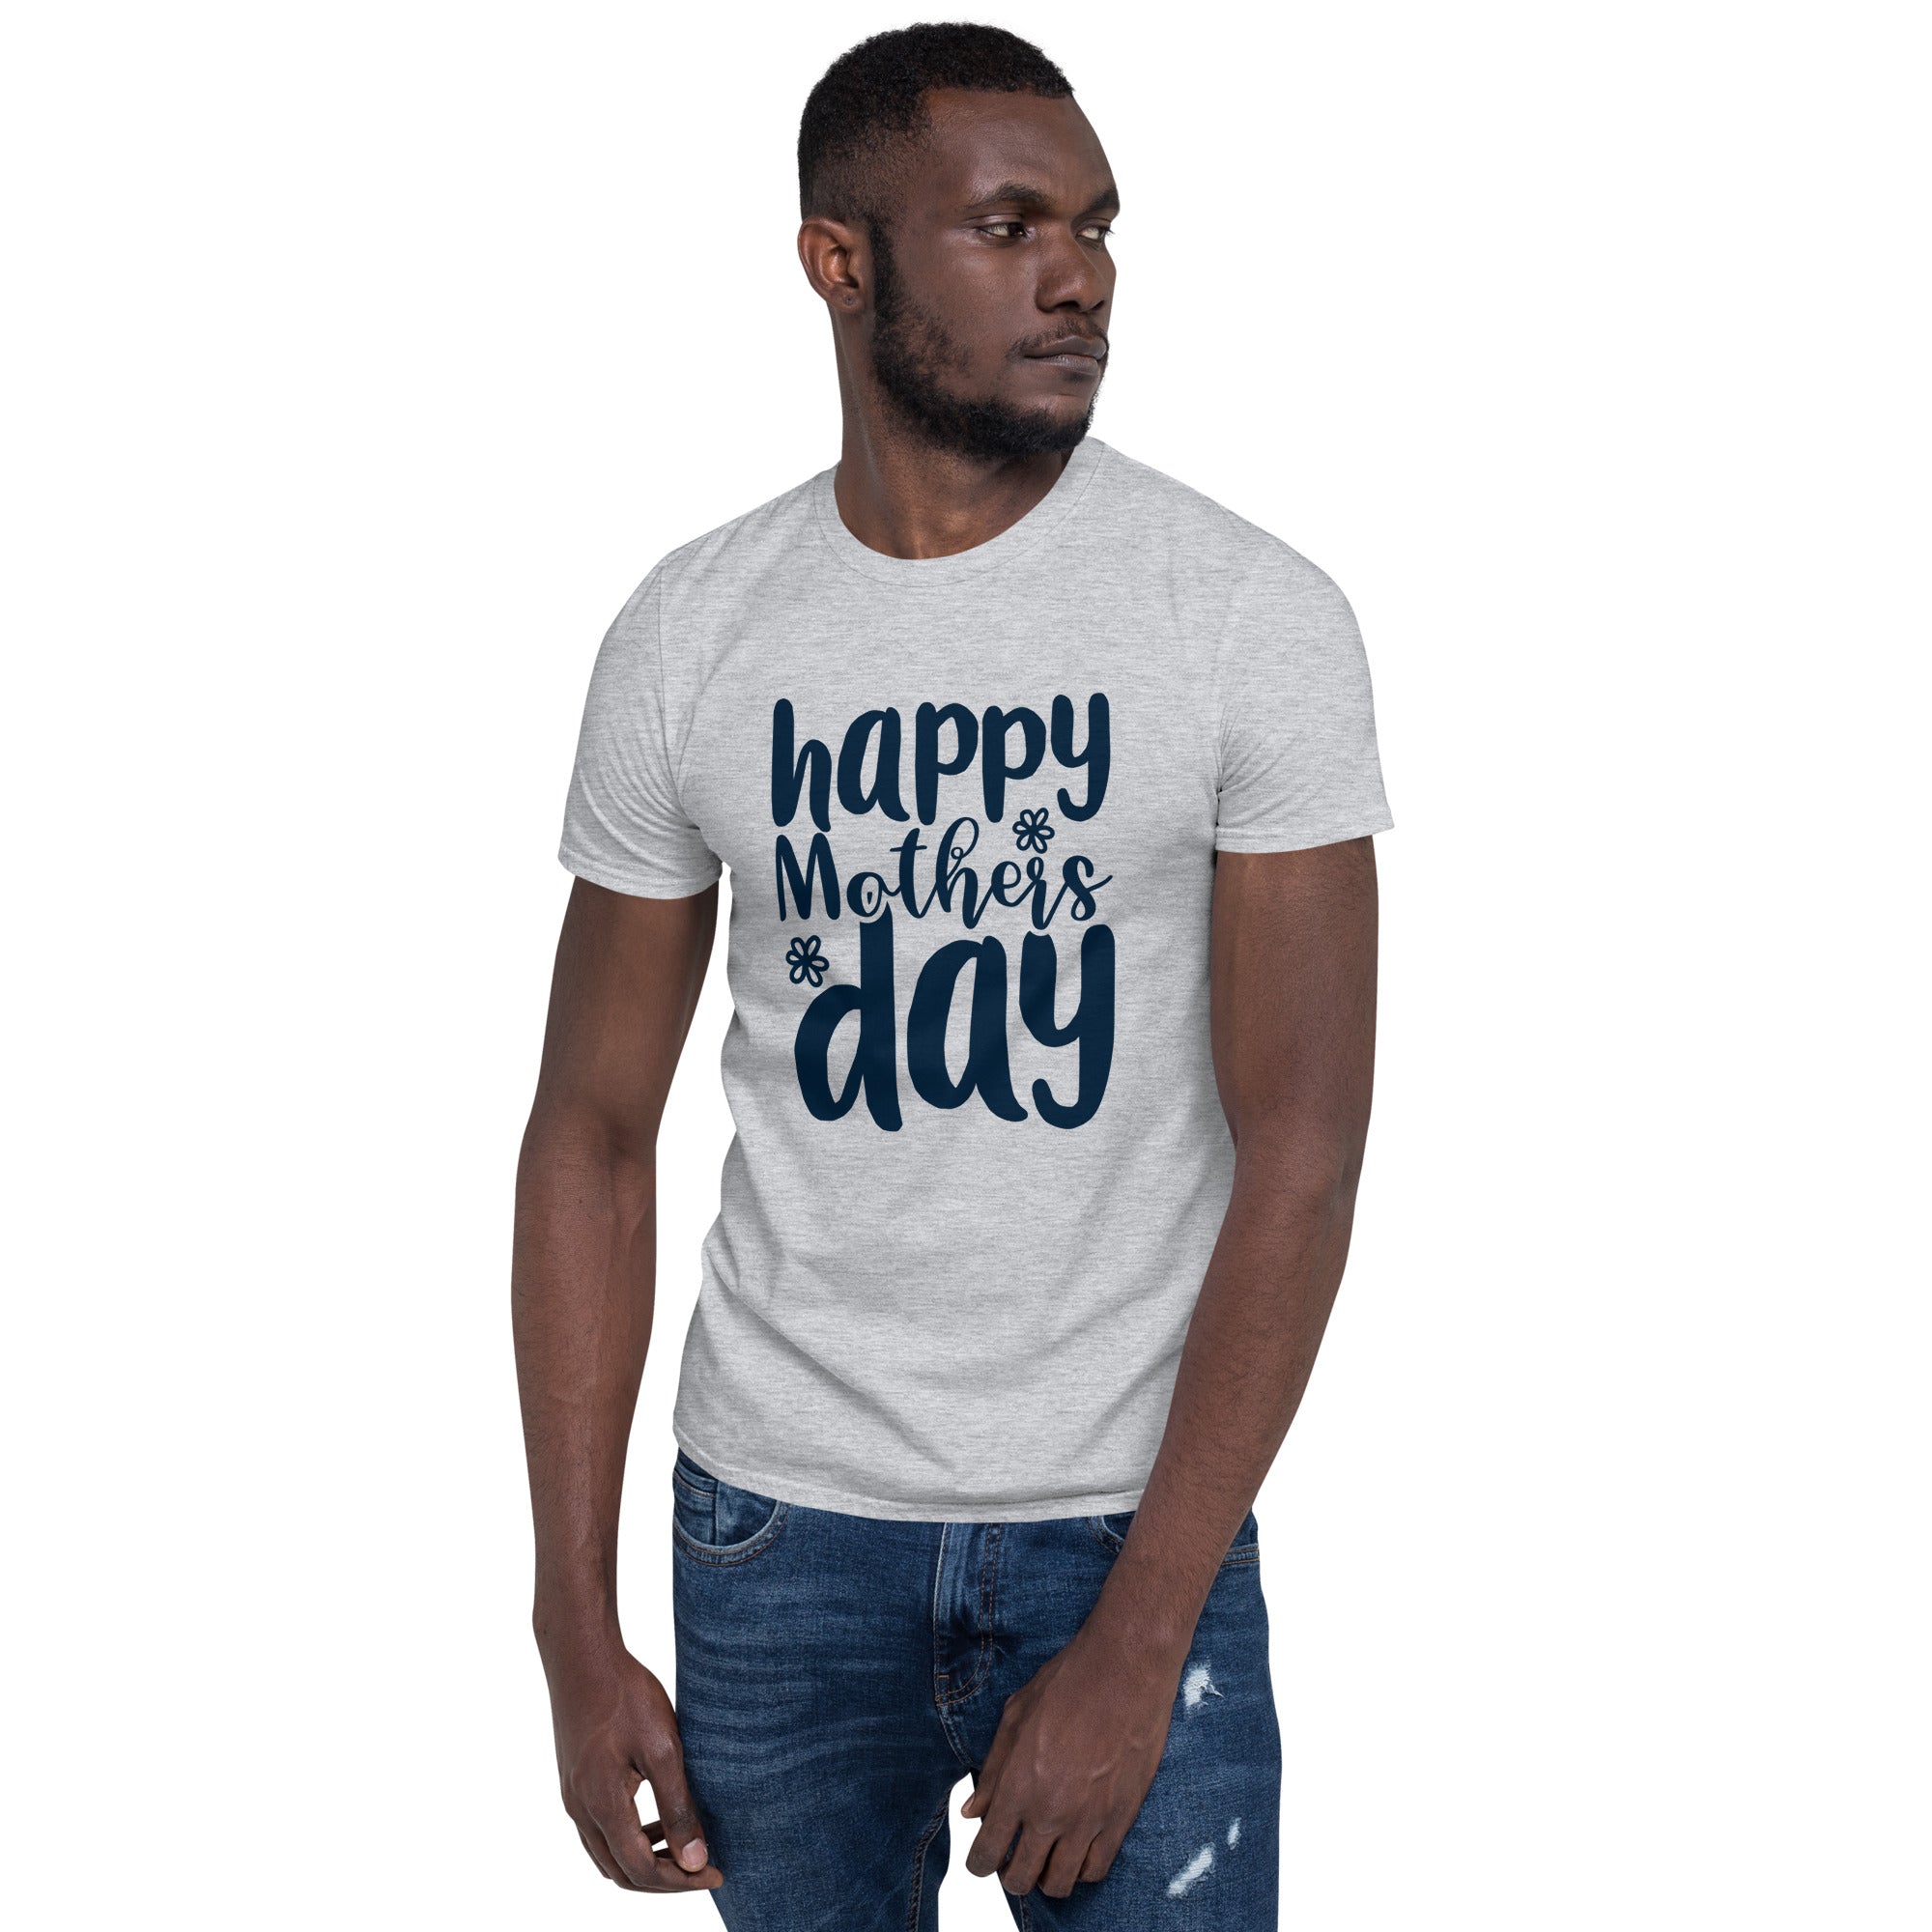 Happy Mother's Day - Short-Sleeve Unisex T-Shirt